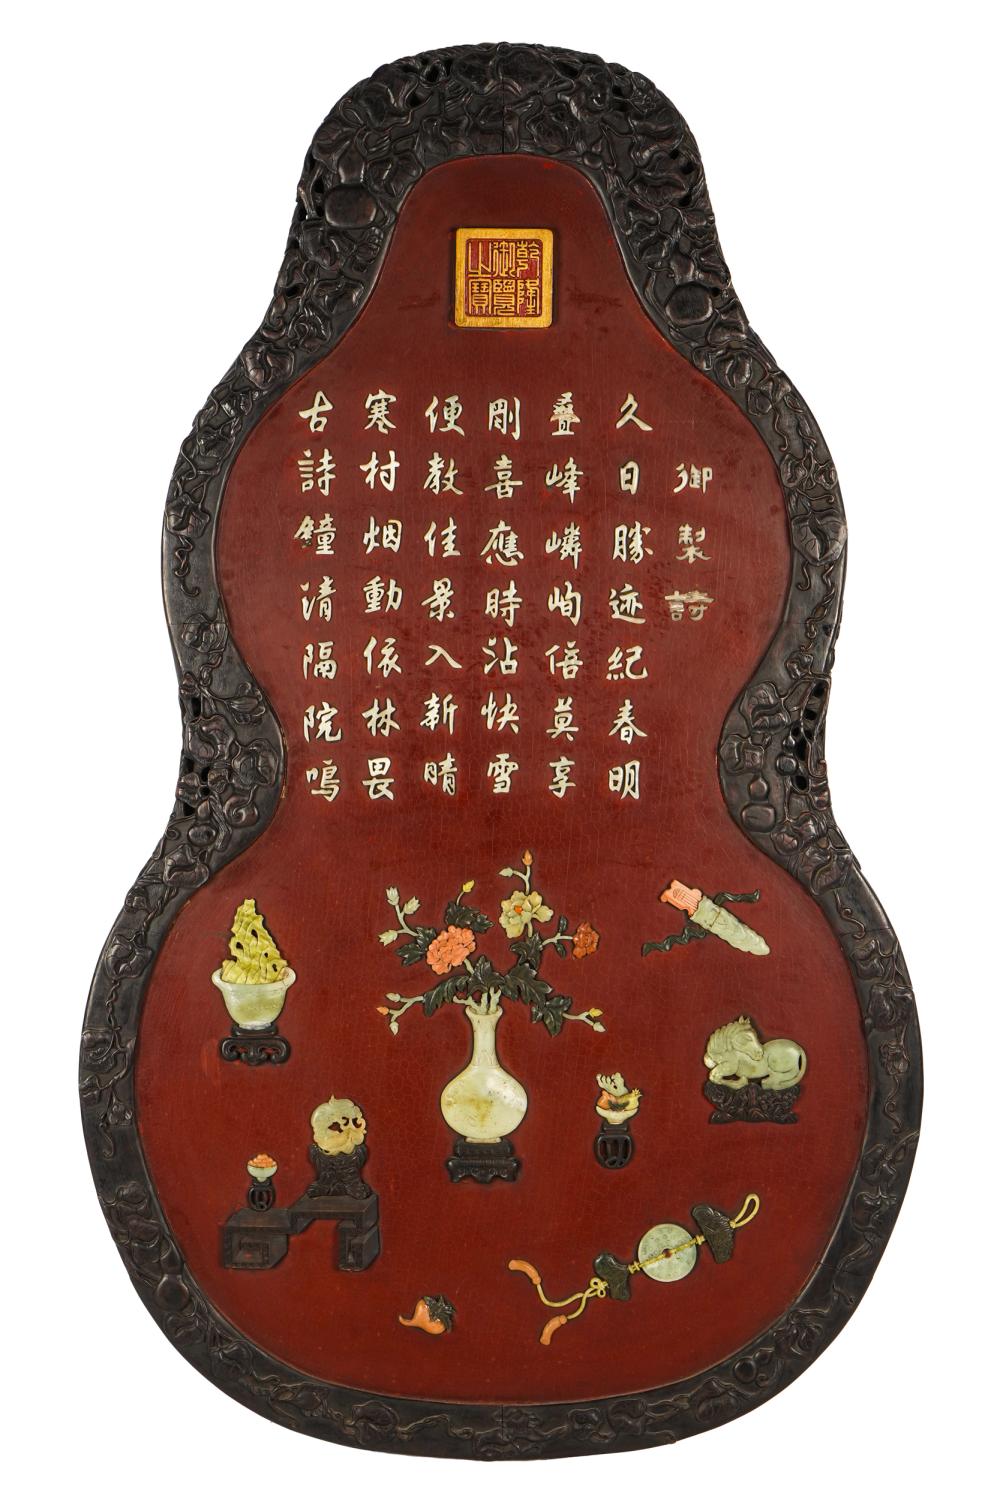 CHINESE INLAID WALL PANELCondition: